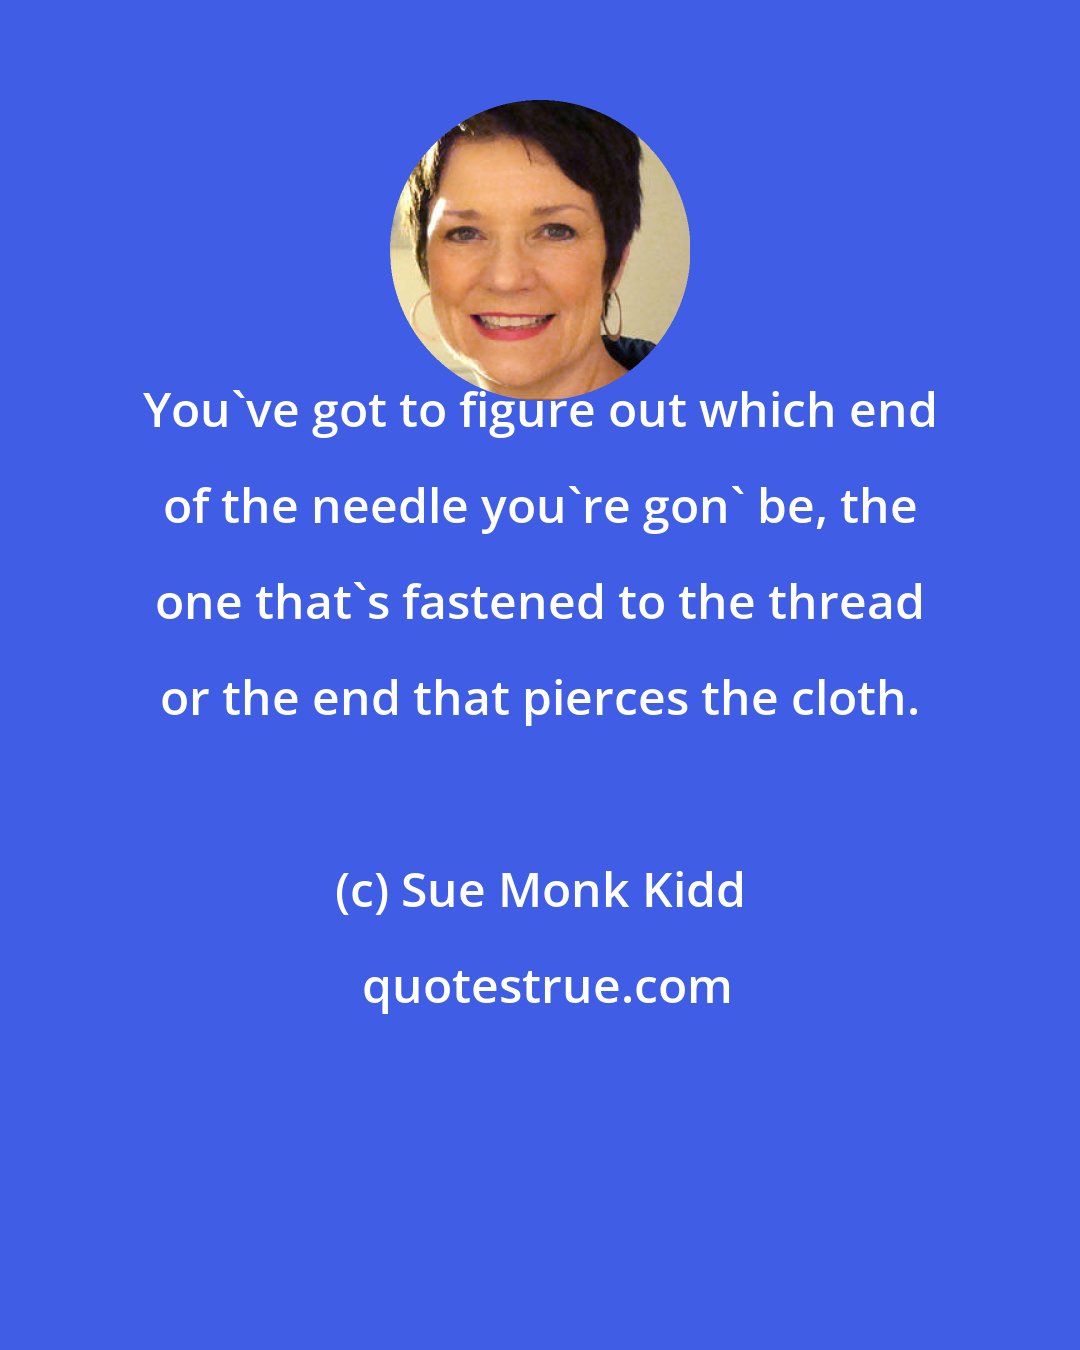 Sue Monk Kidd: You've got to figure out which end of the needle you're gon' be, the one that's fastened to the thread or the end that pierces the cloth.